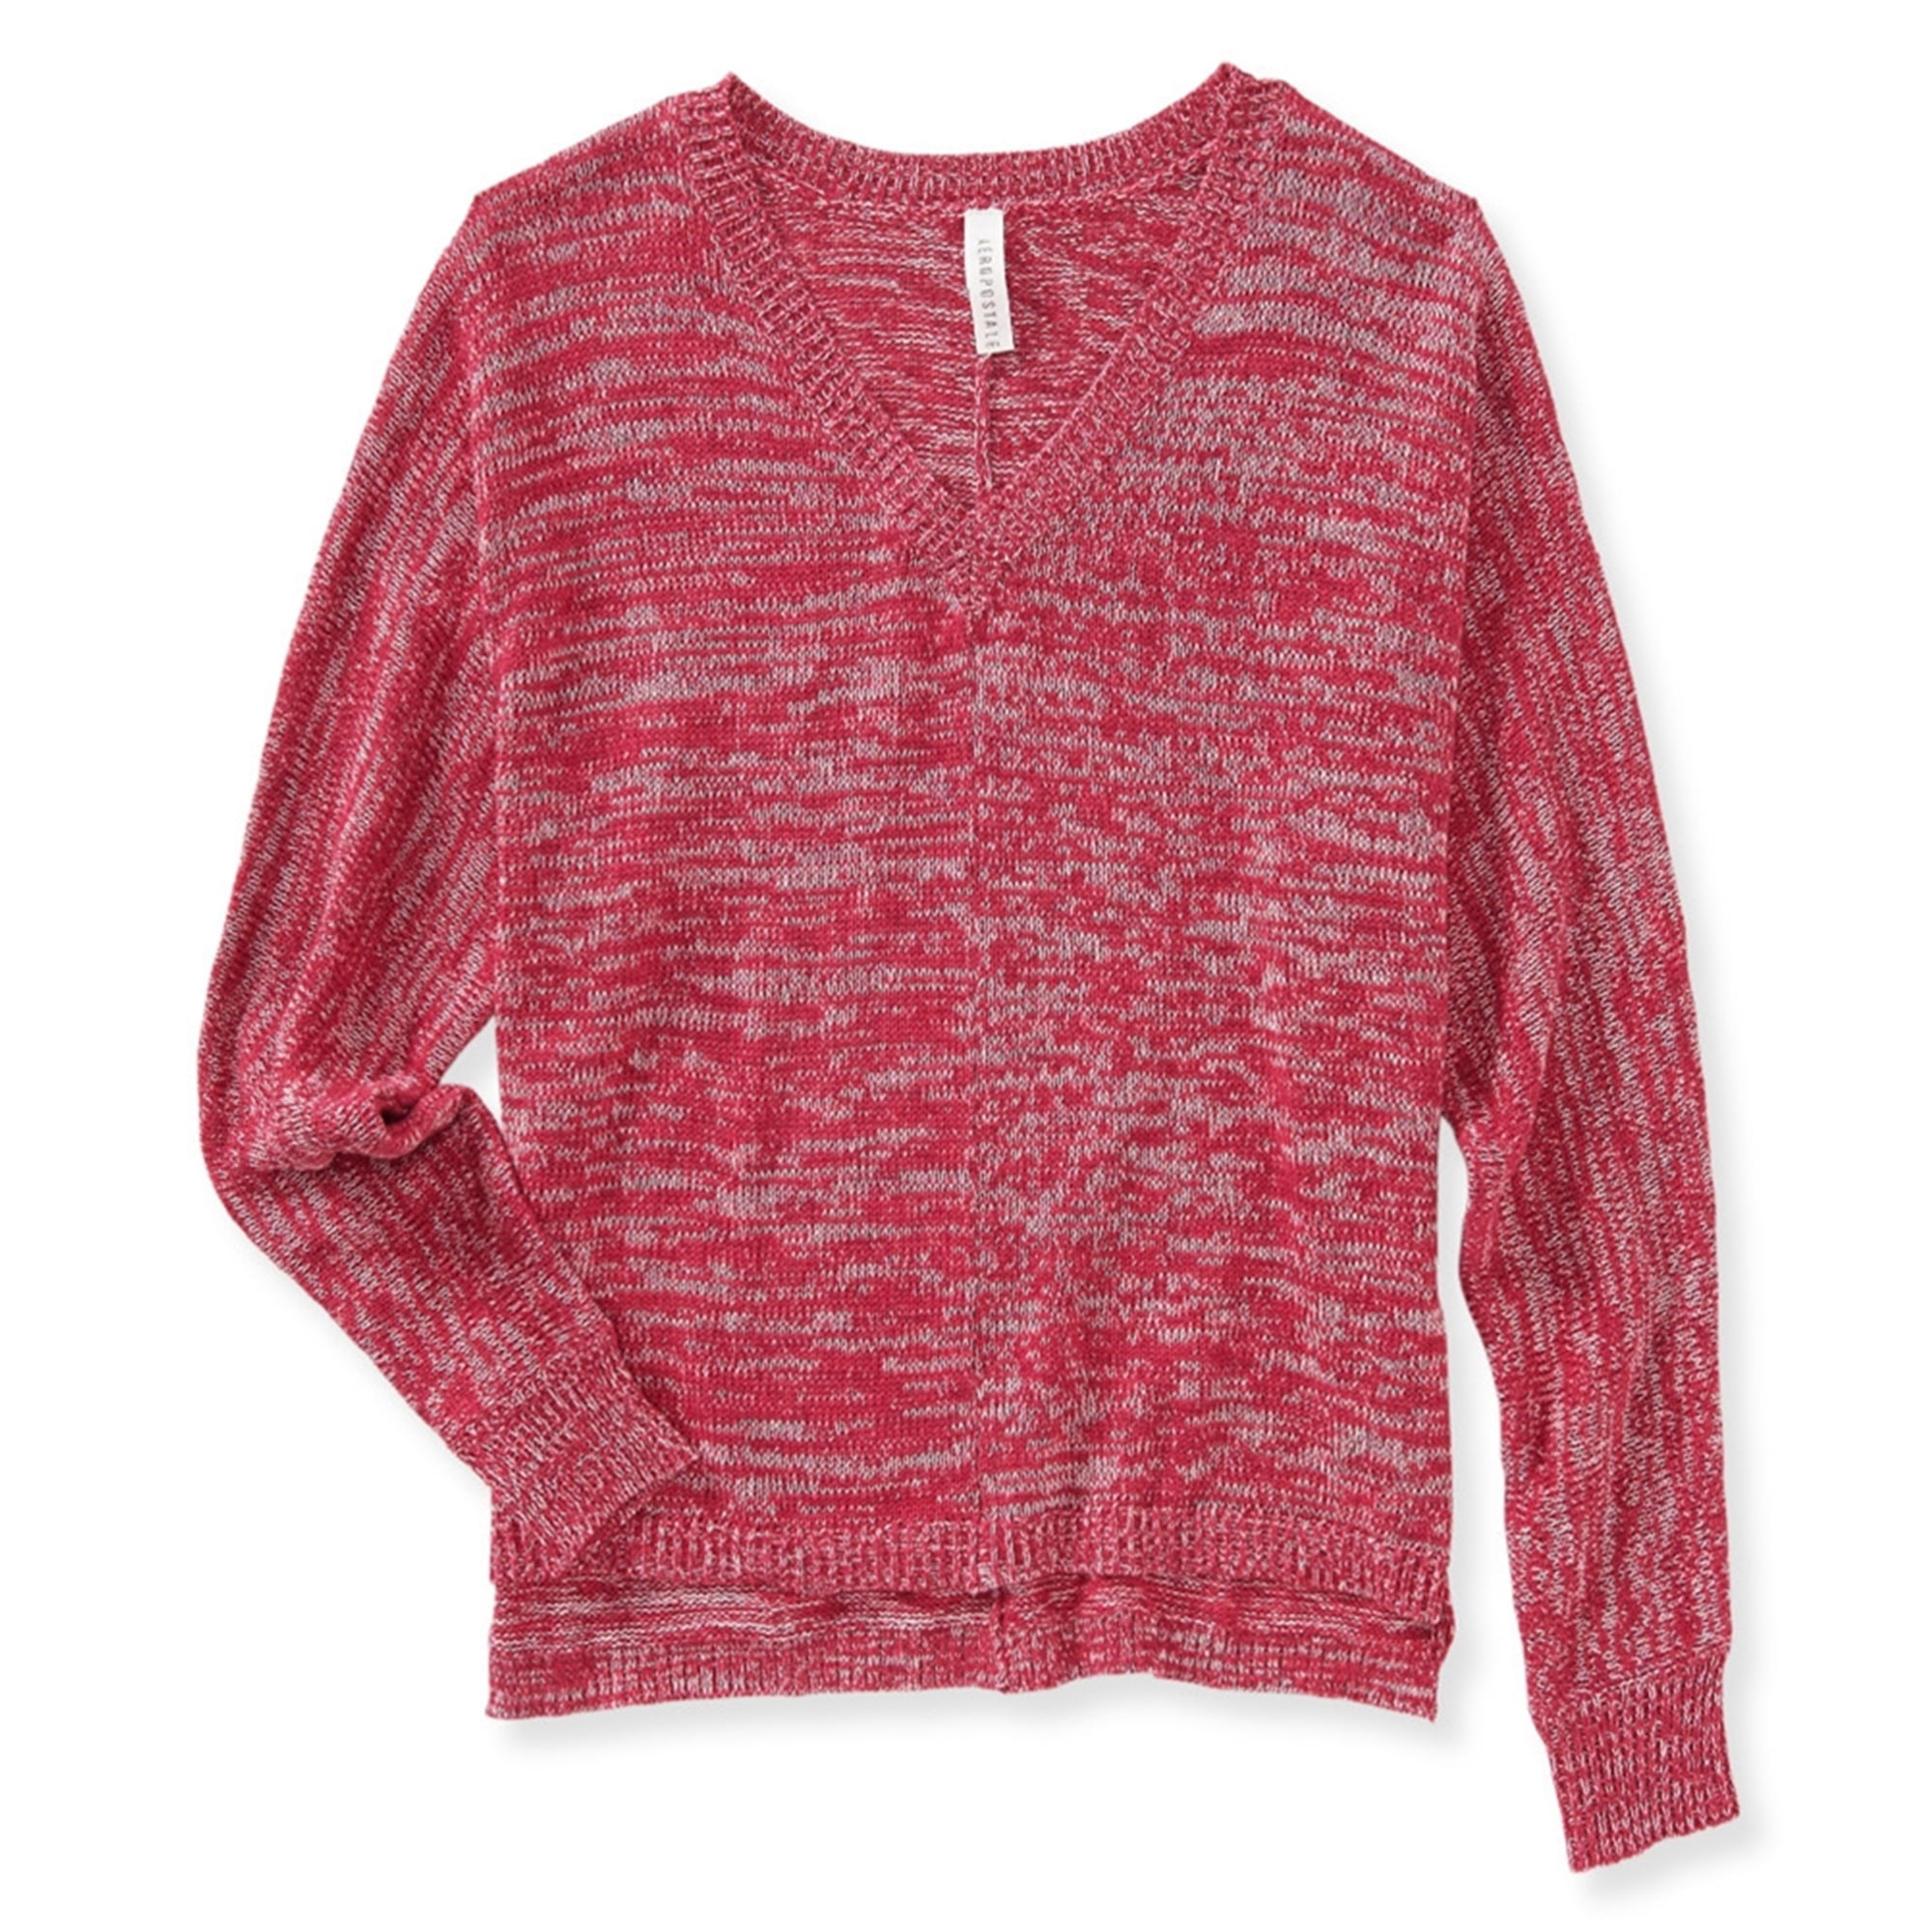 NEW Aeropostale Junior Girls Long Sleeve Red Pullover Sweater XL X-Large 